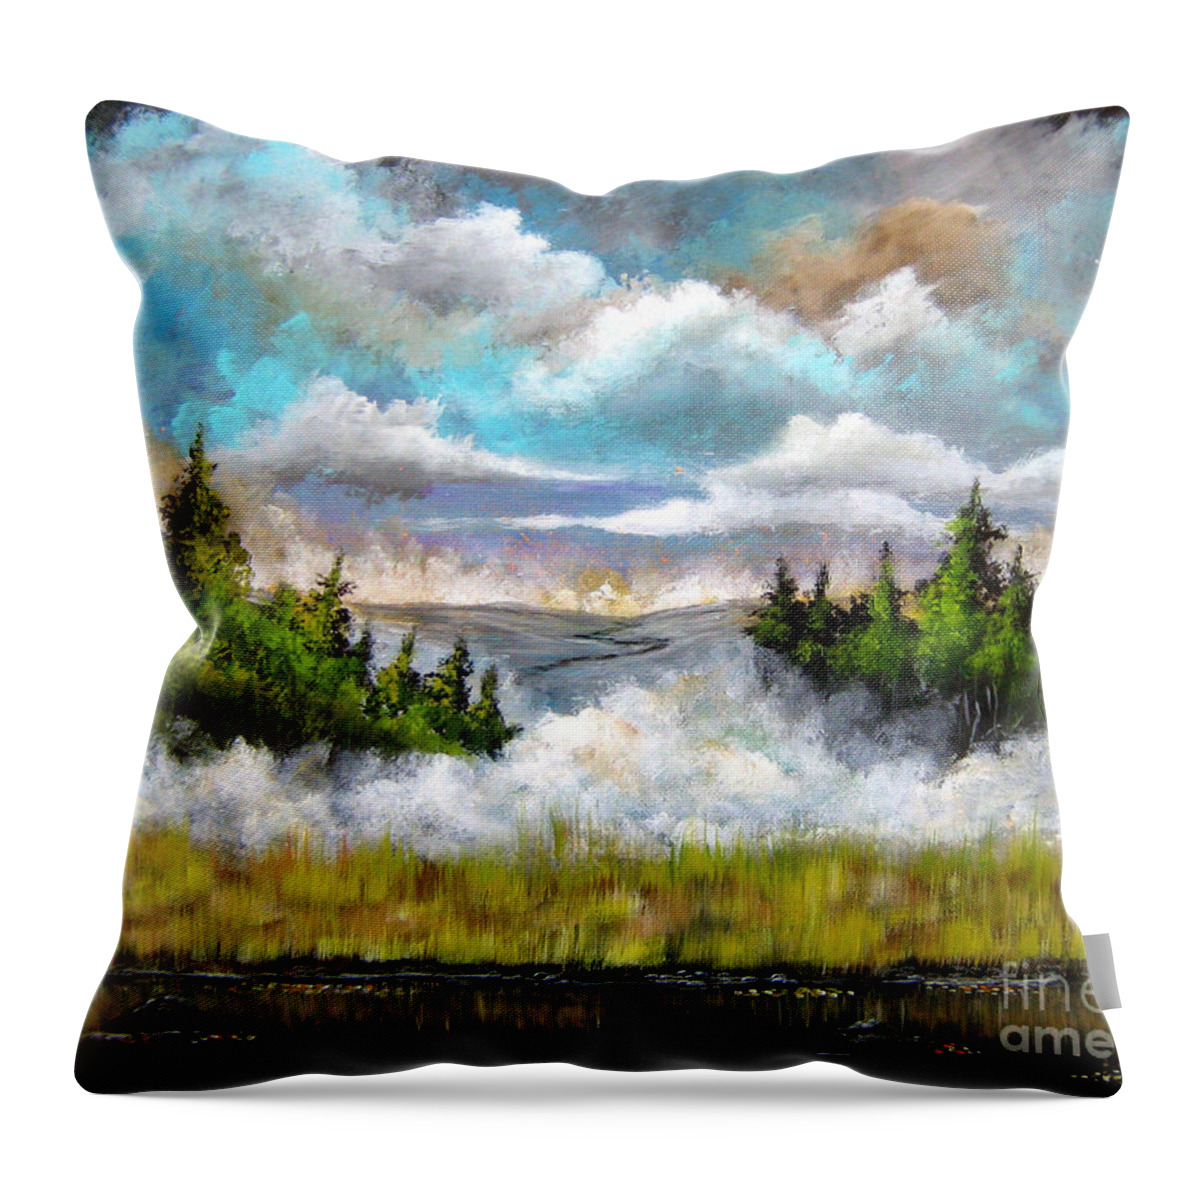 Home Throw Pillow featuring the painting Going Home by Bella Apollonia